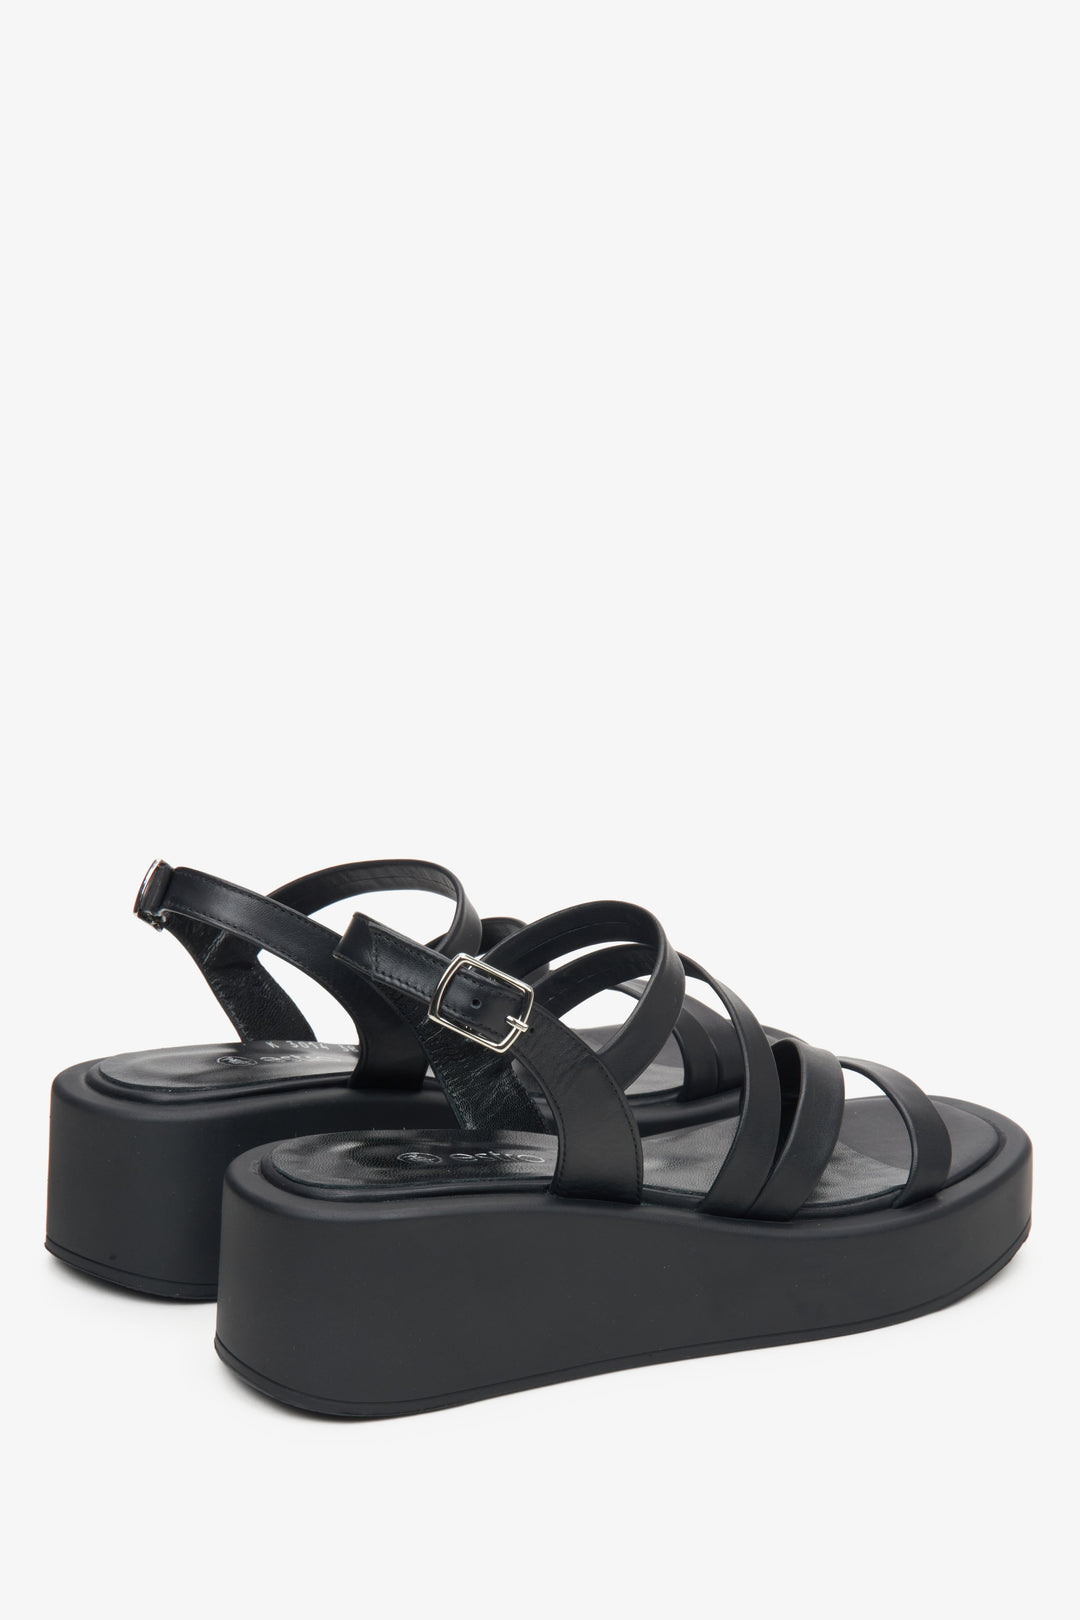 Women's leather black wedge sandals by Estro - close-up on the side line and heel of the shoe.